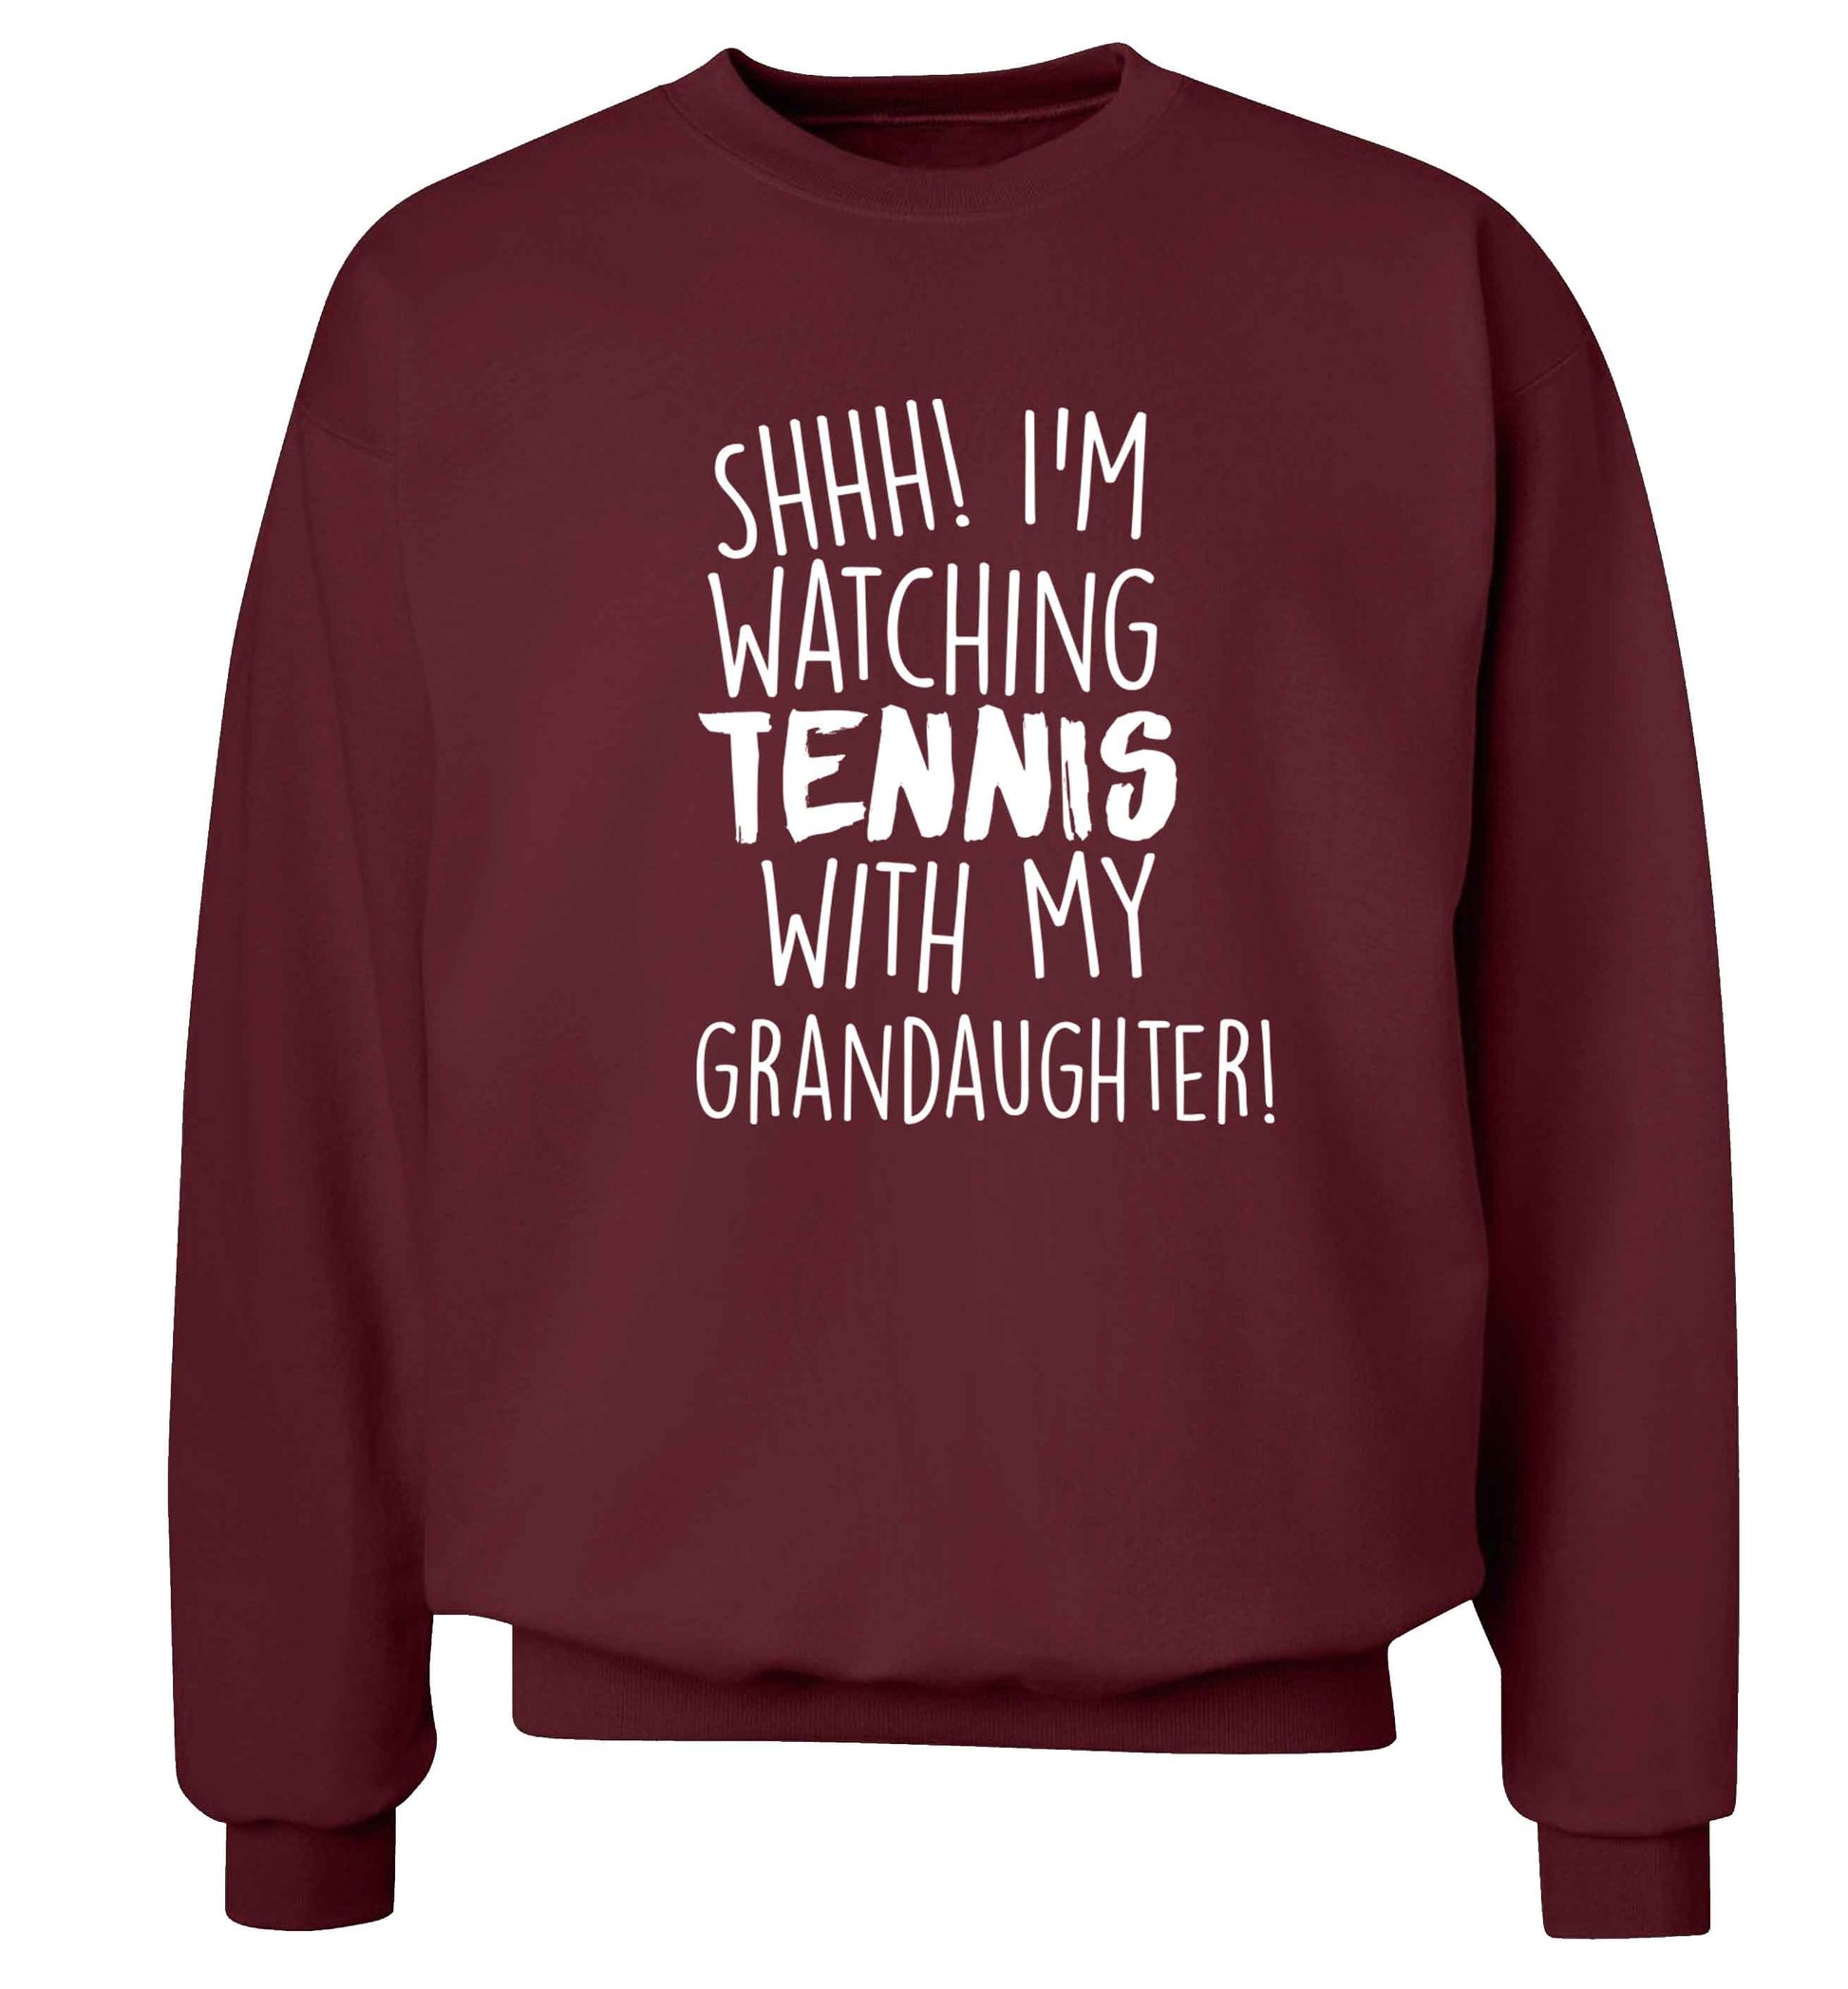 Shh! I'm watching tennis with my granddaughter! Adult's unisex maroon Sweater 2XL